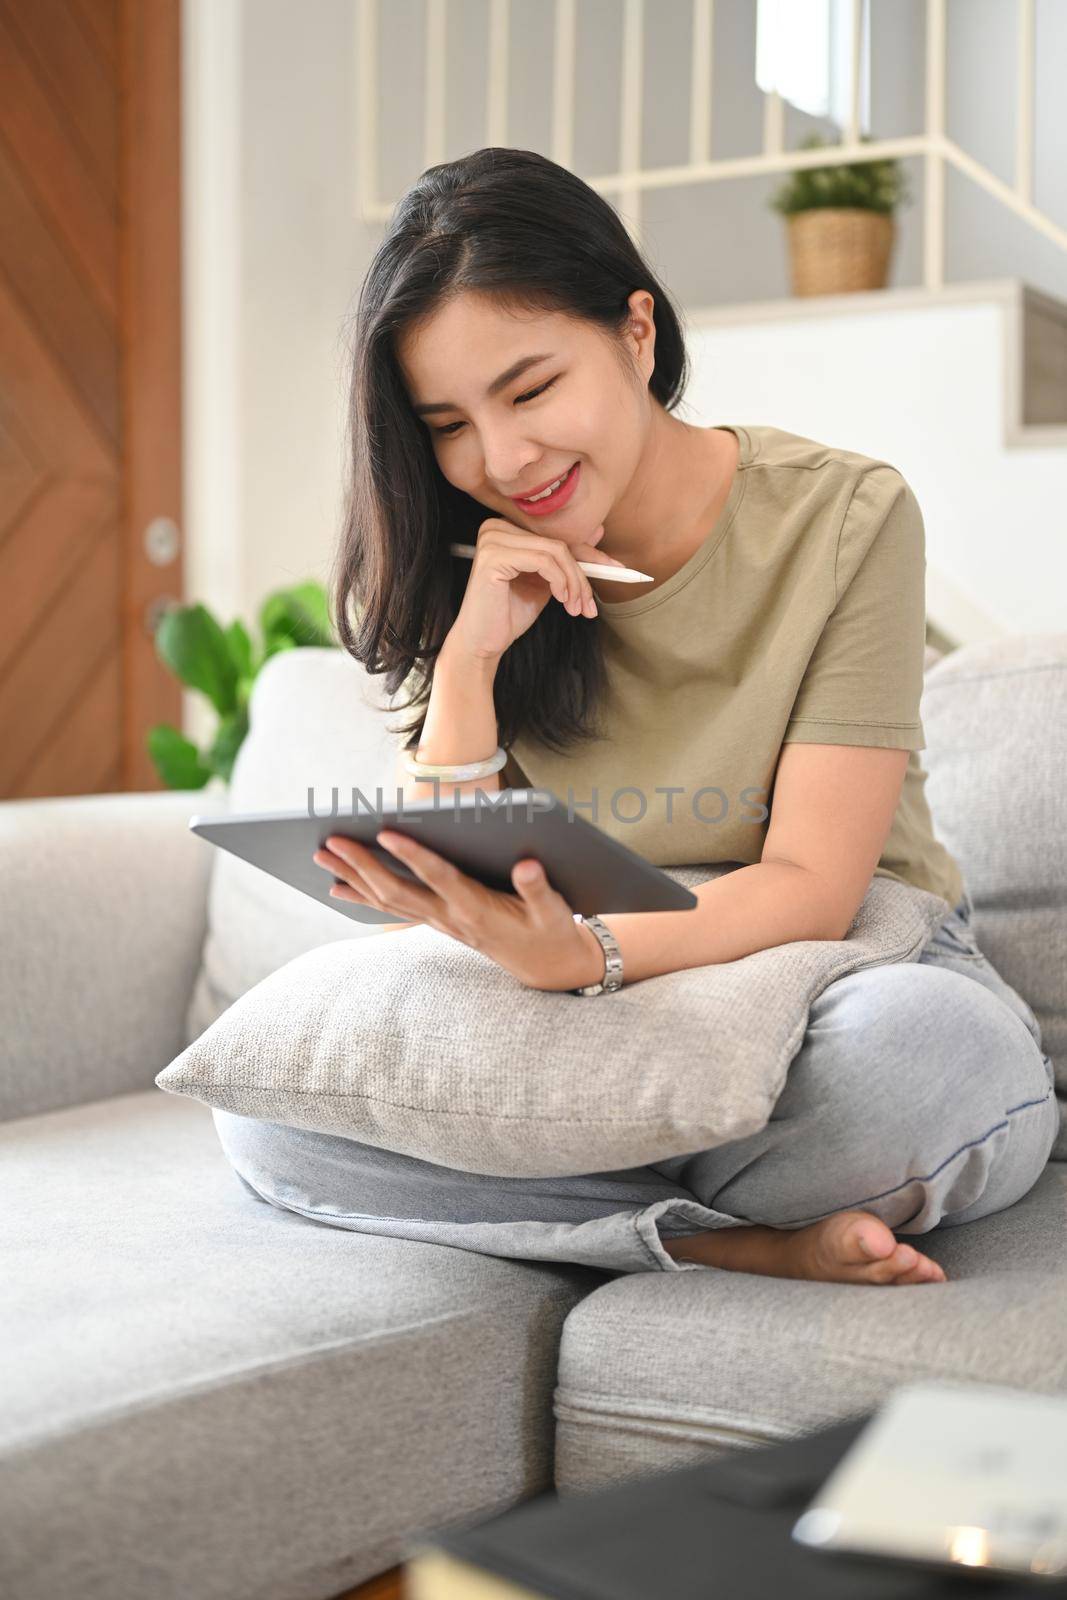 Smiling young woman reading ebook on digital tablet while relaxing in comfortable couch at home by prathanchorruangsak